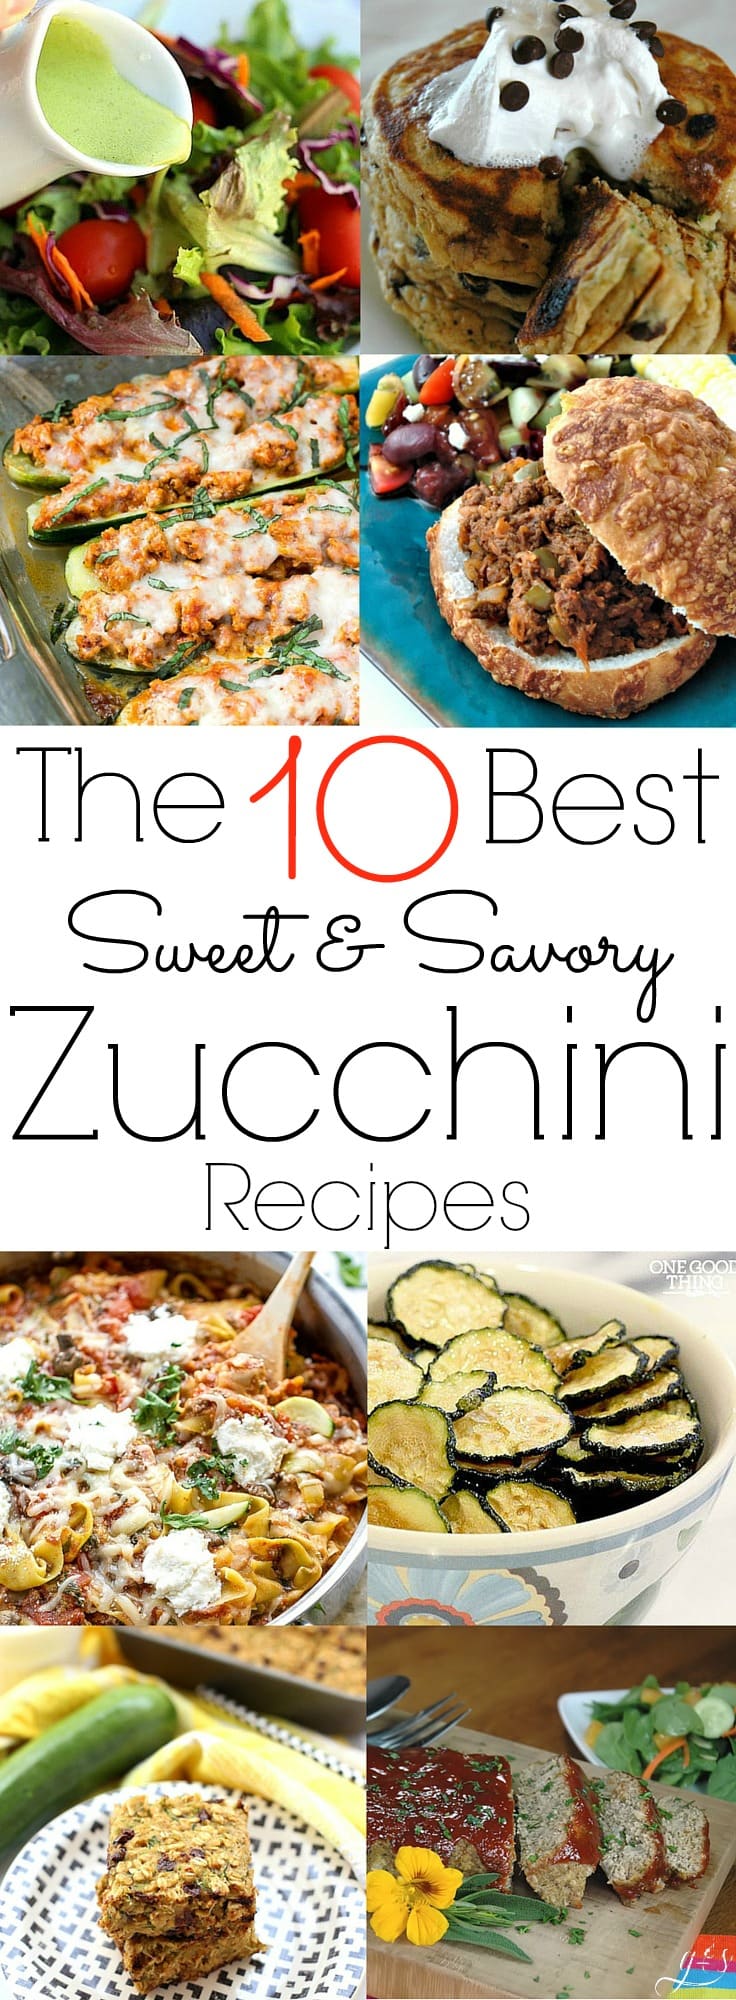 Here are the 10 BEST Sweet & Savory Zucchini Recipes that are healthy, homemade, and easy to prepare! Your family will love these gluten-free and clean eating meals for breakfast, lunch, and dinner. You will find the likes of cookies, pancakes, and bars for the sweet options and stuffed zucchini chicken boats, sloppy joes, and a vegan chip, plus more for the savory! Most are low carb but all are packed with veggies and other whole foods! 